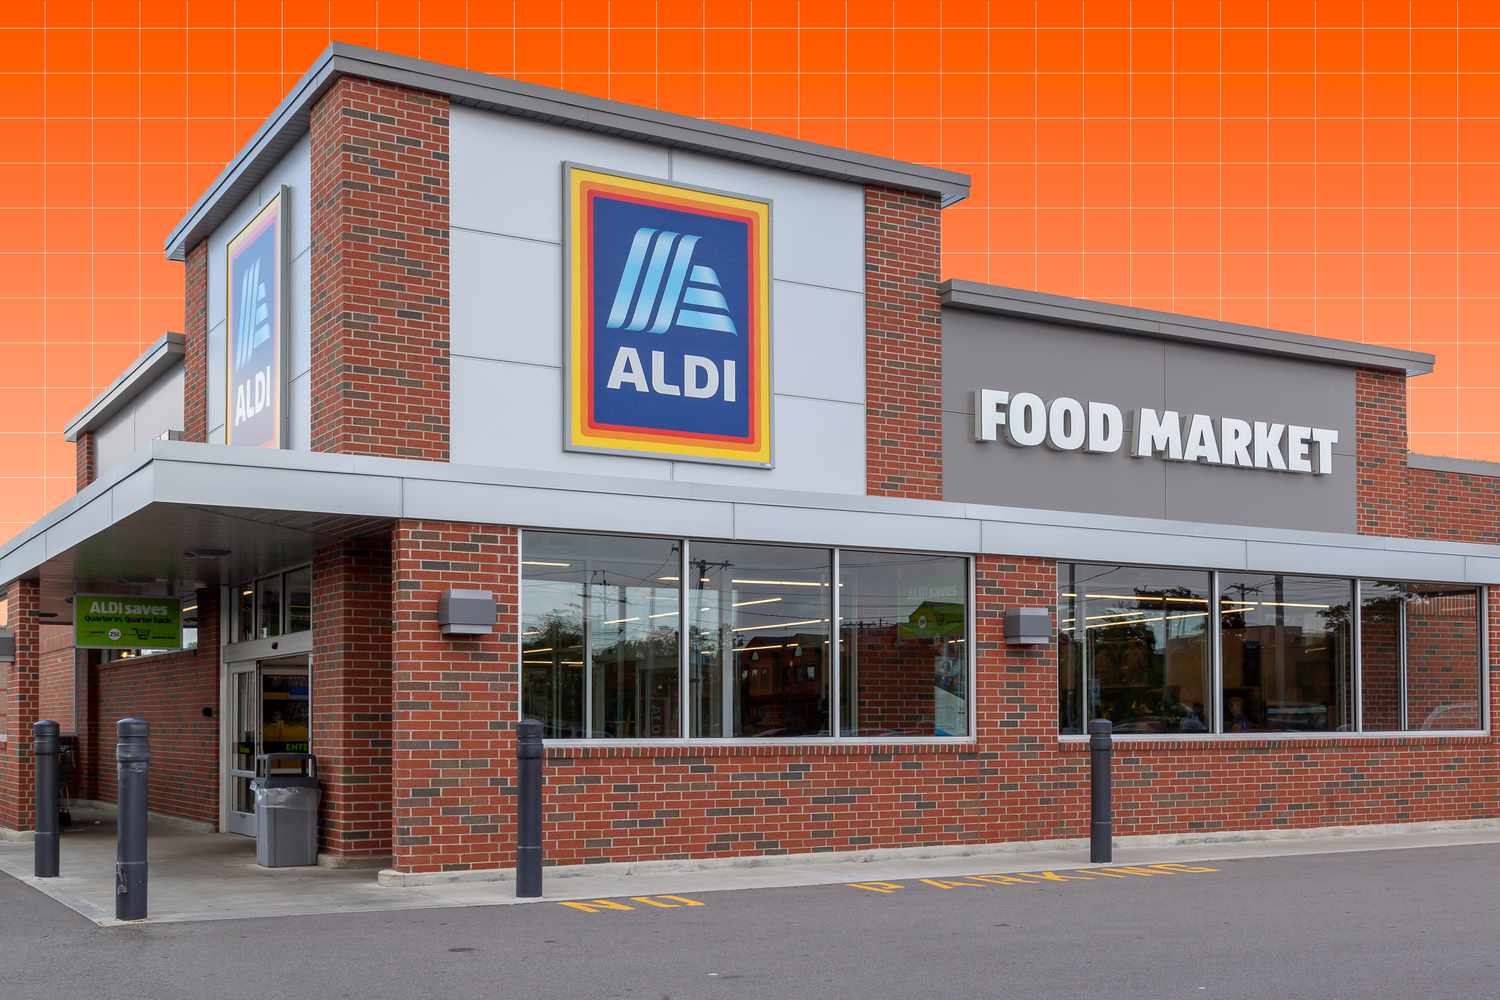 Aldi's Strategic Expansion into Arkansas: Could Searcy Be On The List for a New Aldi?